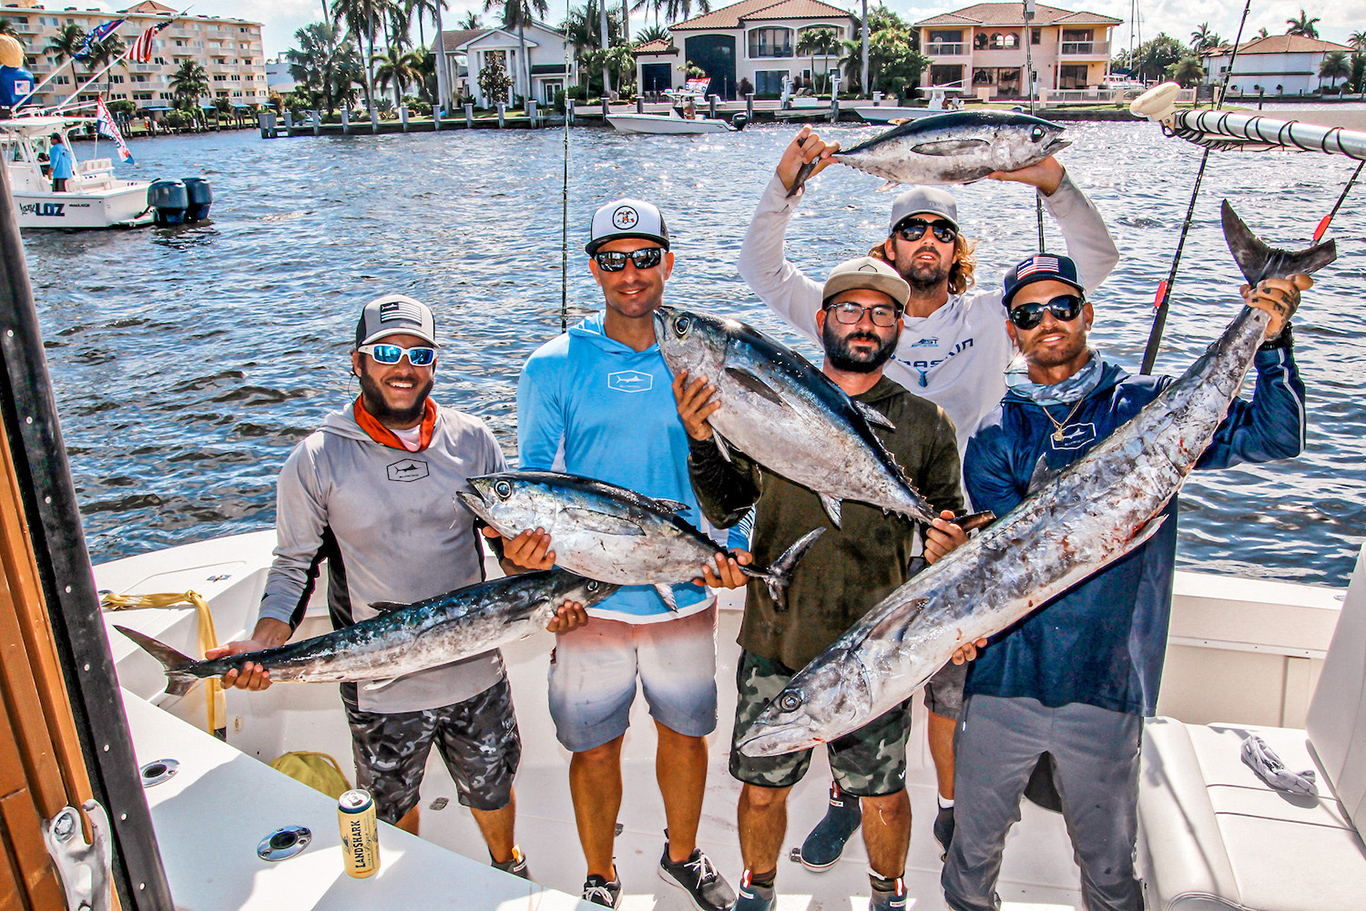 Team “Gator One” Grabs Their First Win at the 25th Annual Saltwater